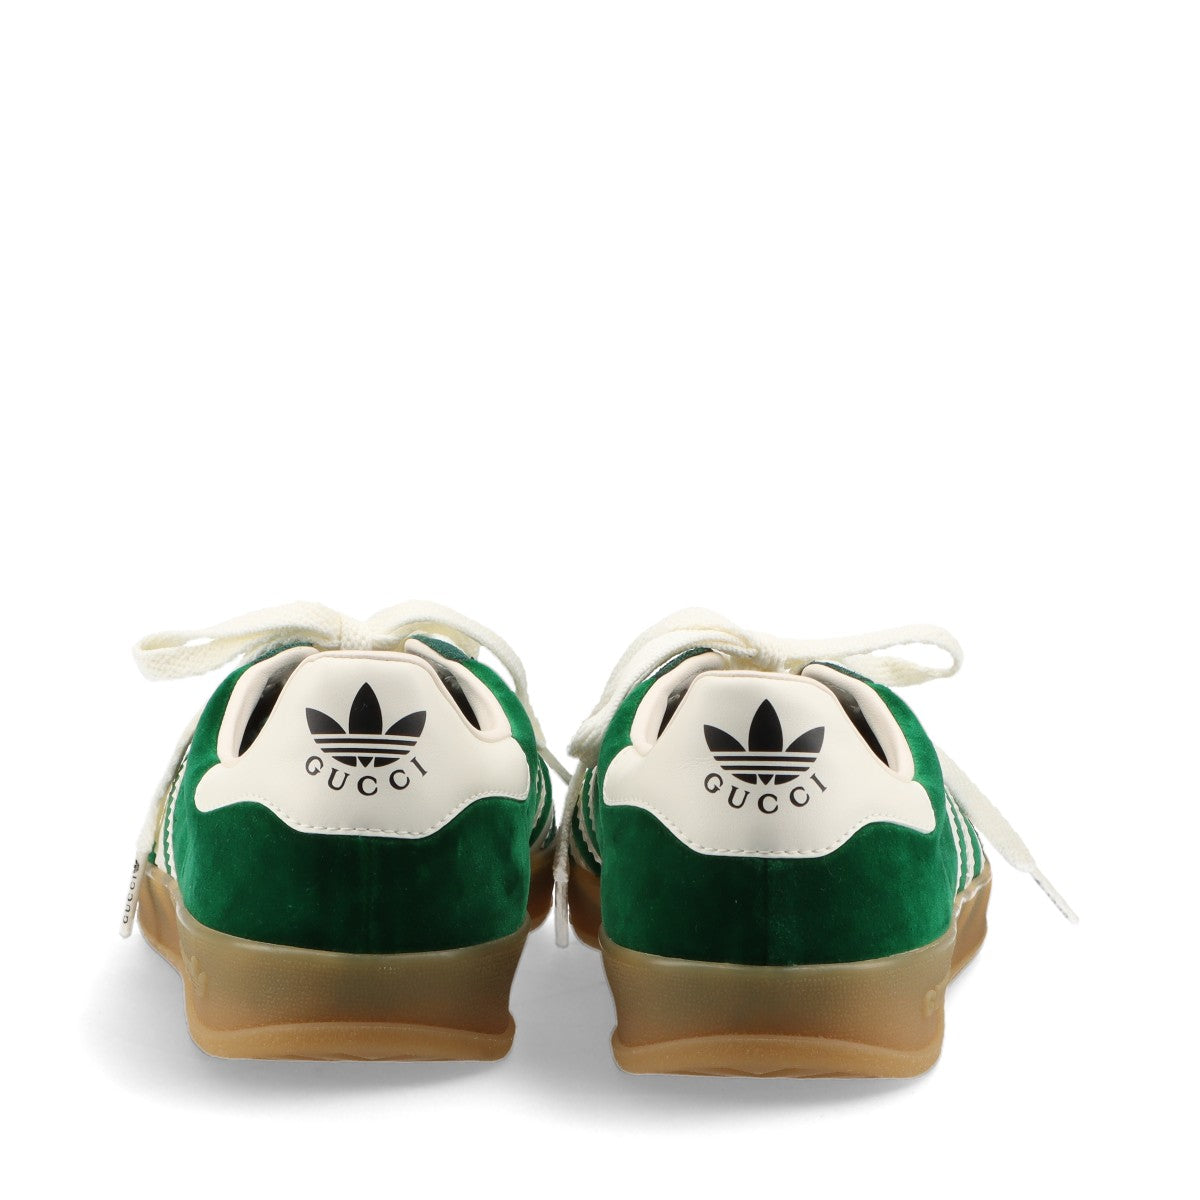 Gucci x Adidas Gazelle Velour & leather Sneakers 24.5cm Ladies' Green 707848 Replacement Laces Included Box There is a bag